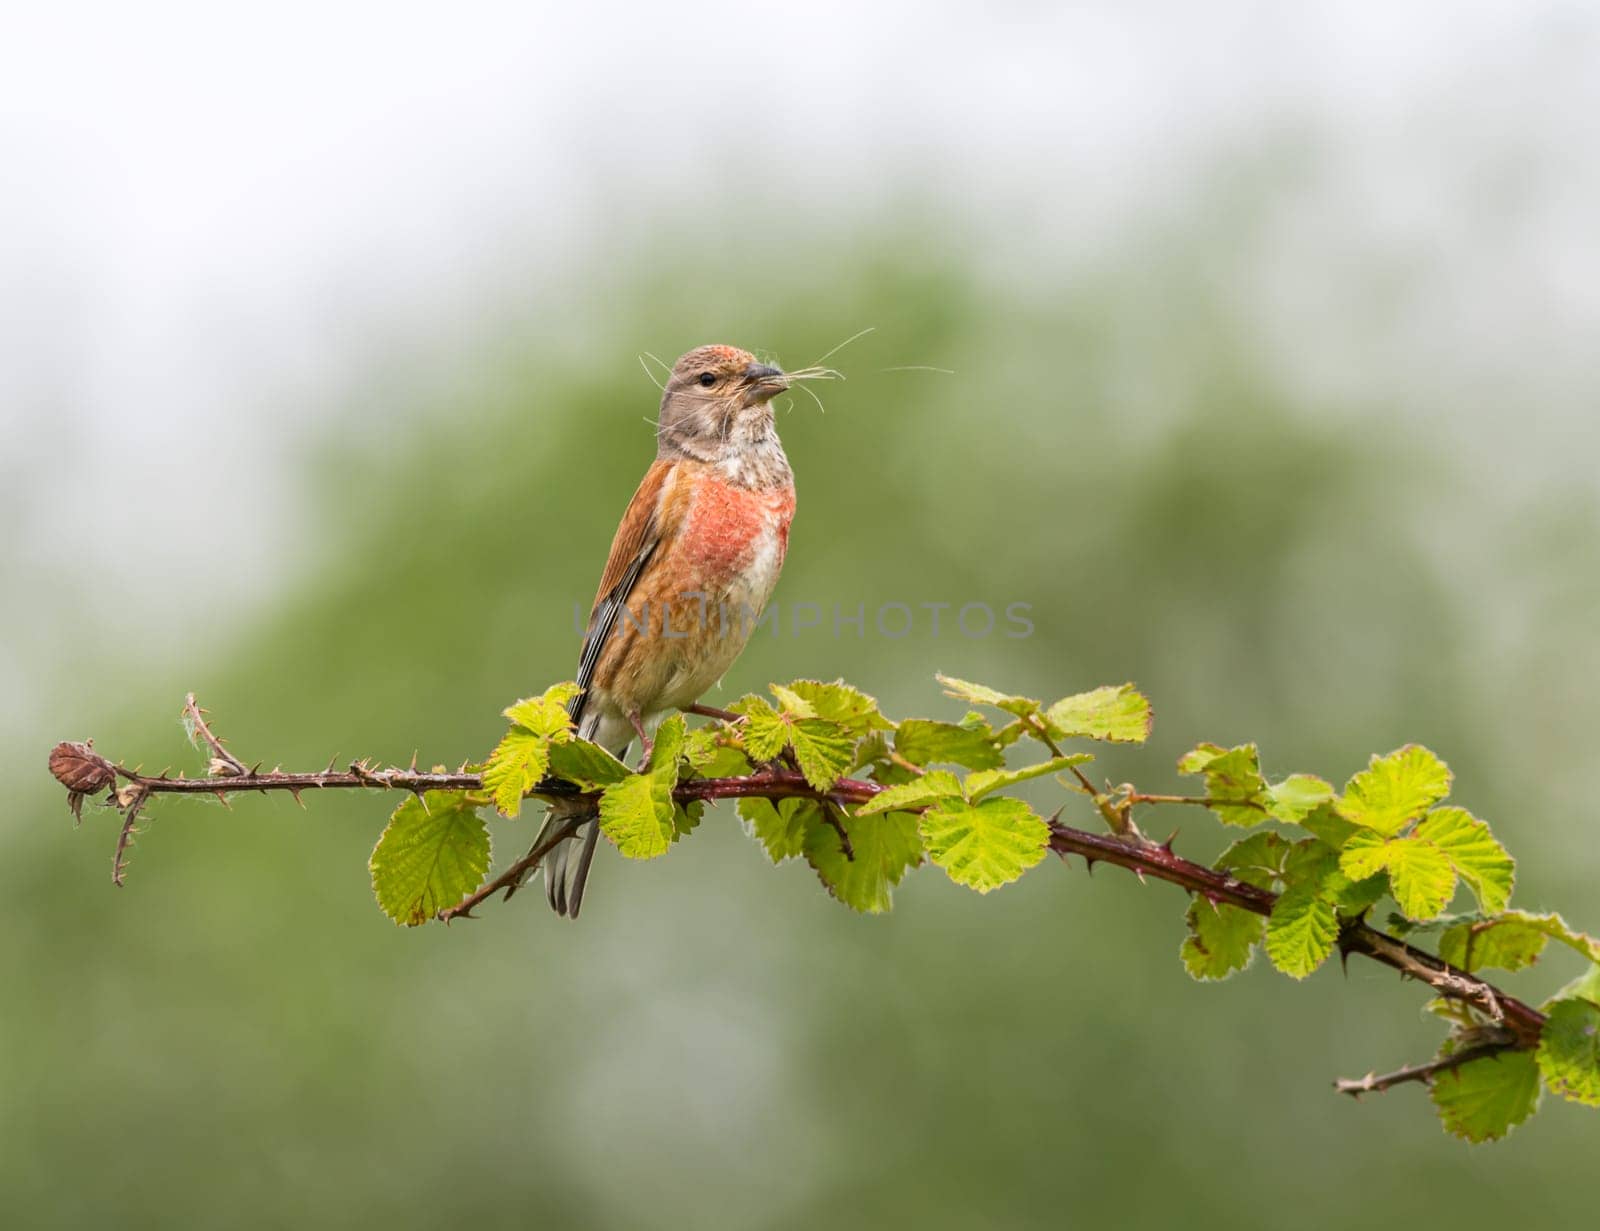 Common linnet, Linaria cannabina, bird standing on a branch